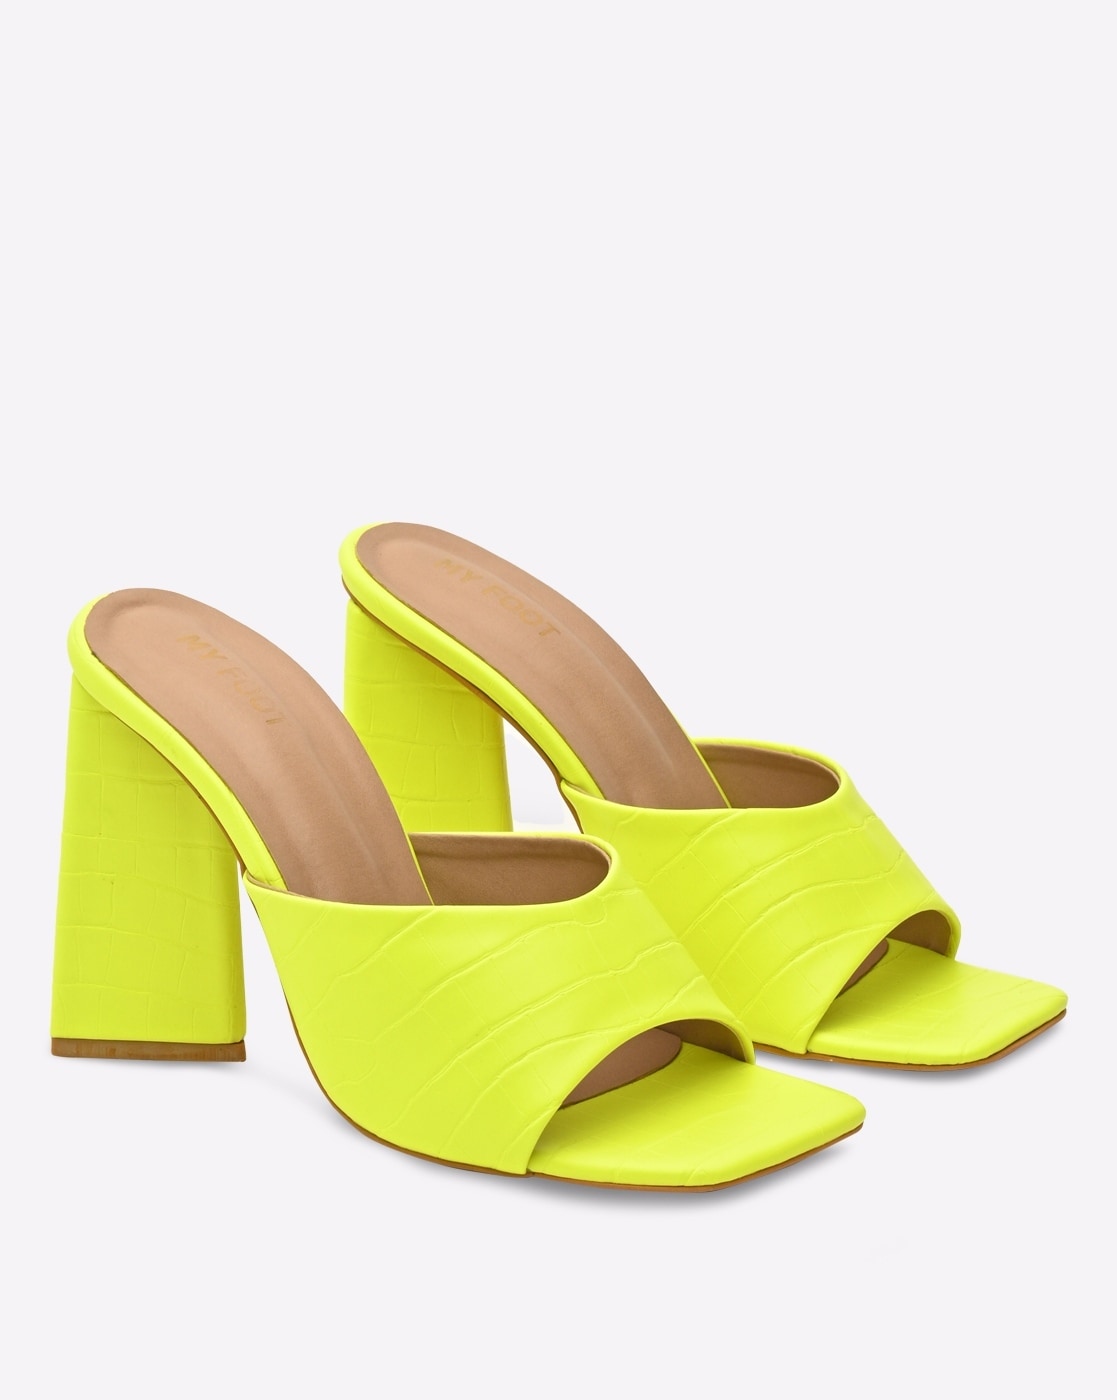 HerStyle Charming- Ankle Strap Rounded Buckle Open Toe Stiletto Heel  (Mustard)